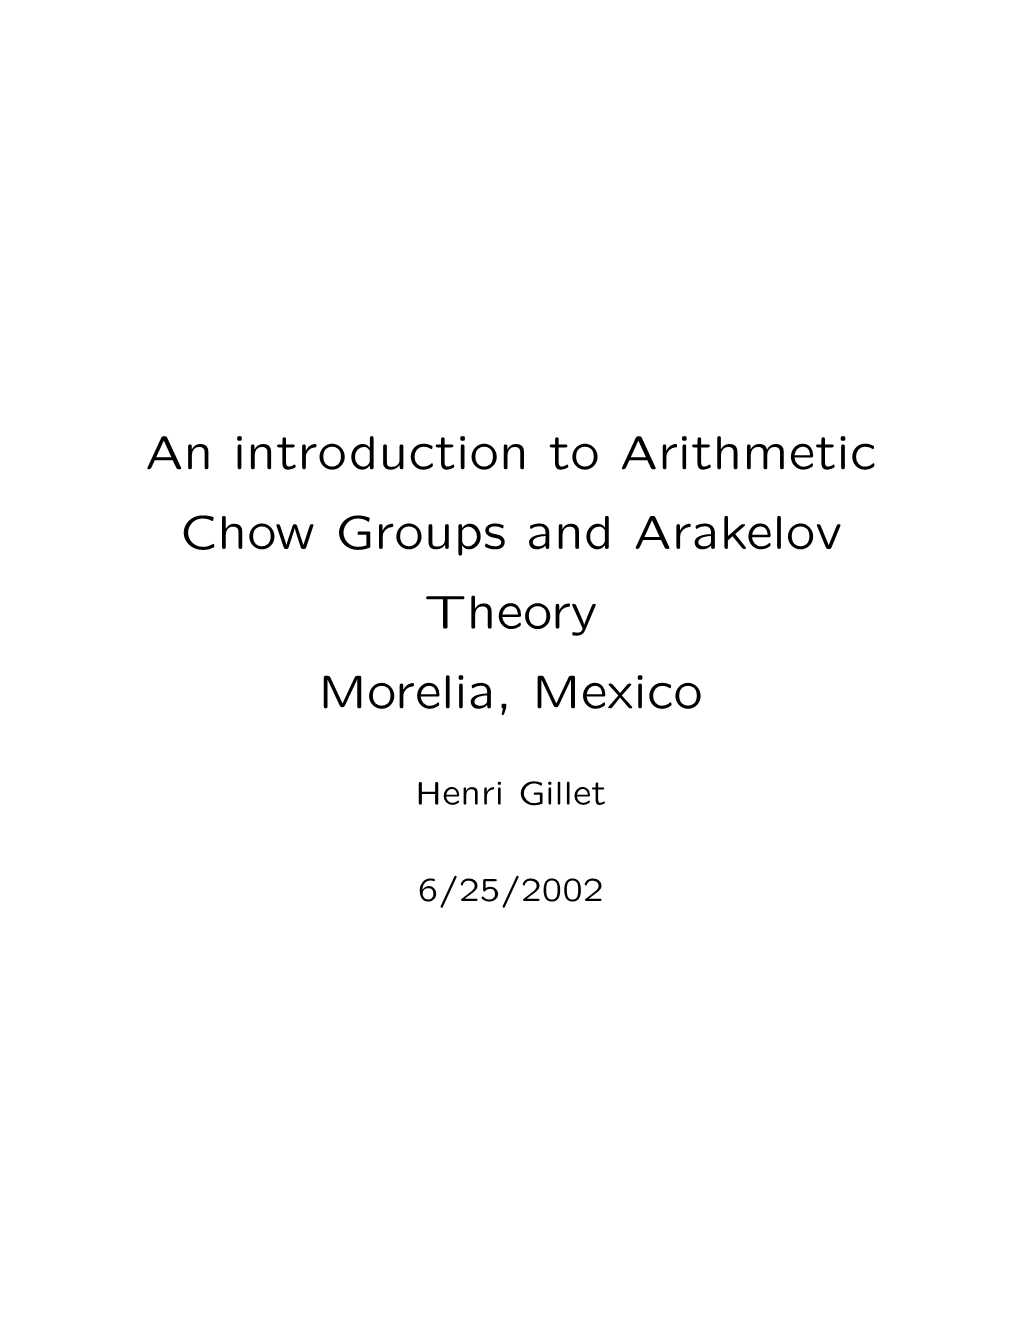 An Introduction to Arithmetic Chow Groups and Arakelov Theory Morelia, Mexico